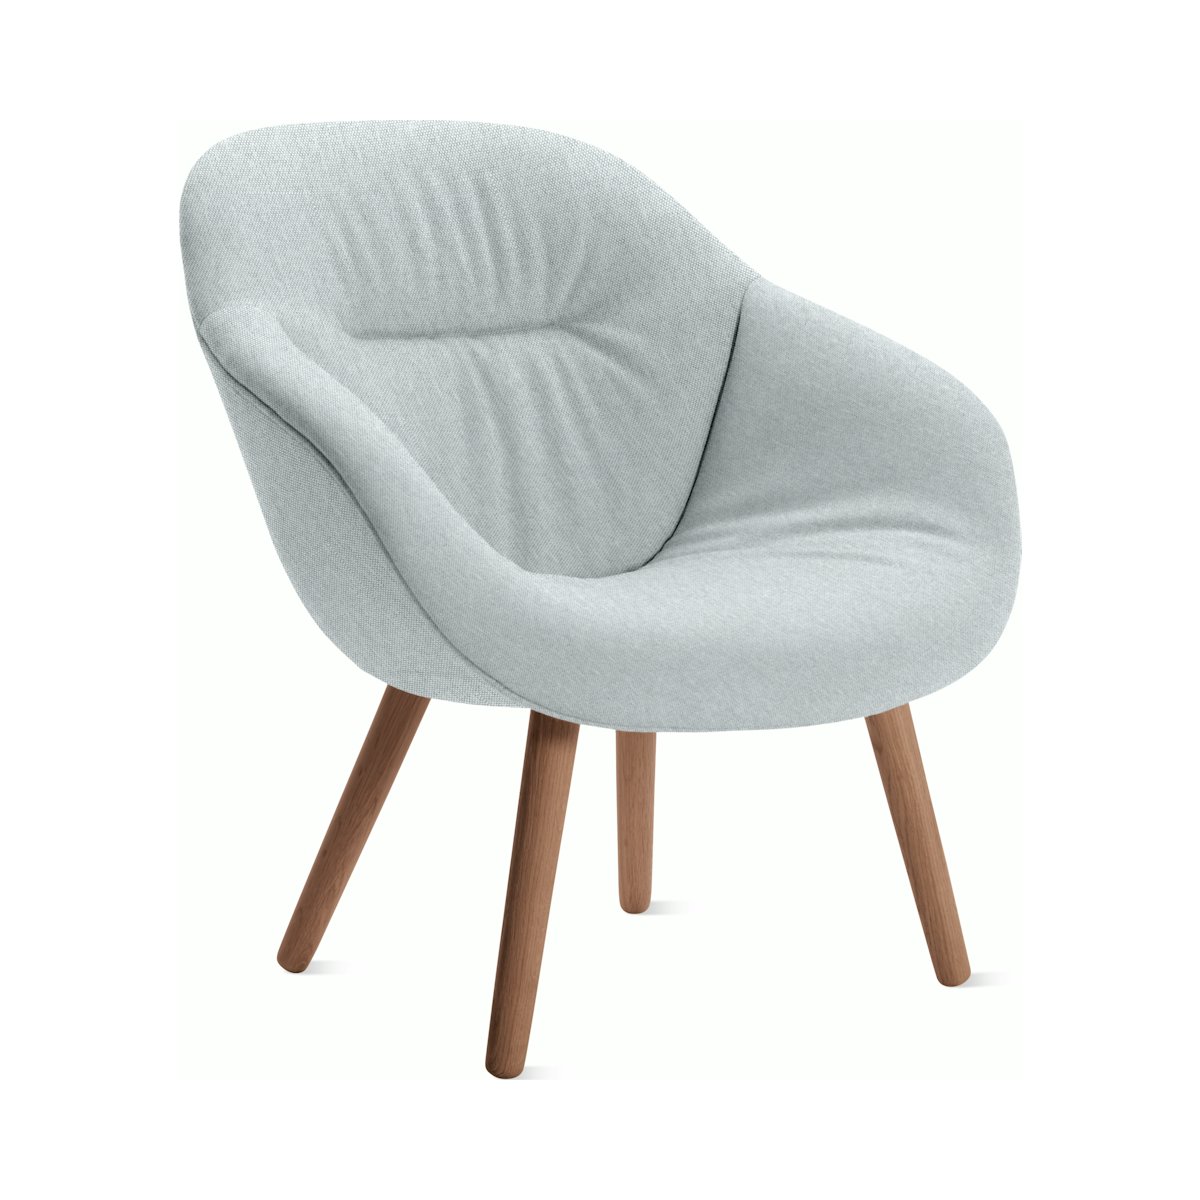 About A Lounge 82 Soft  Armchair, Low Back